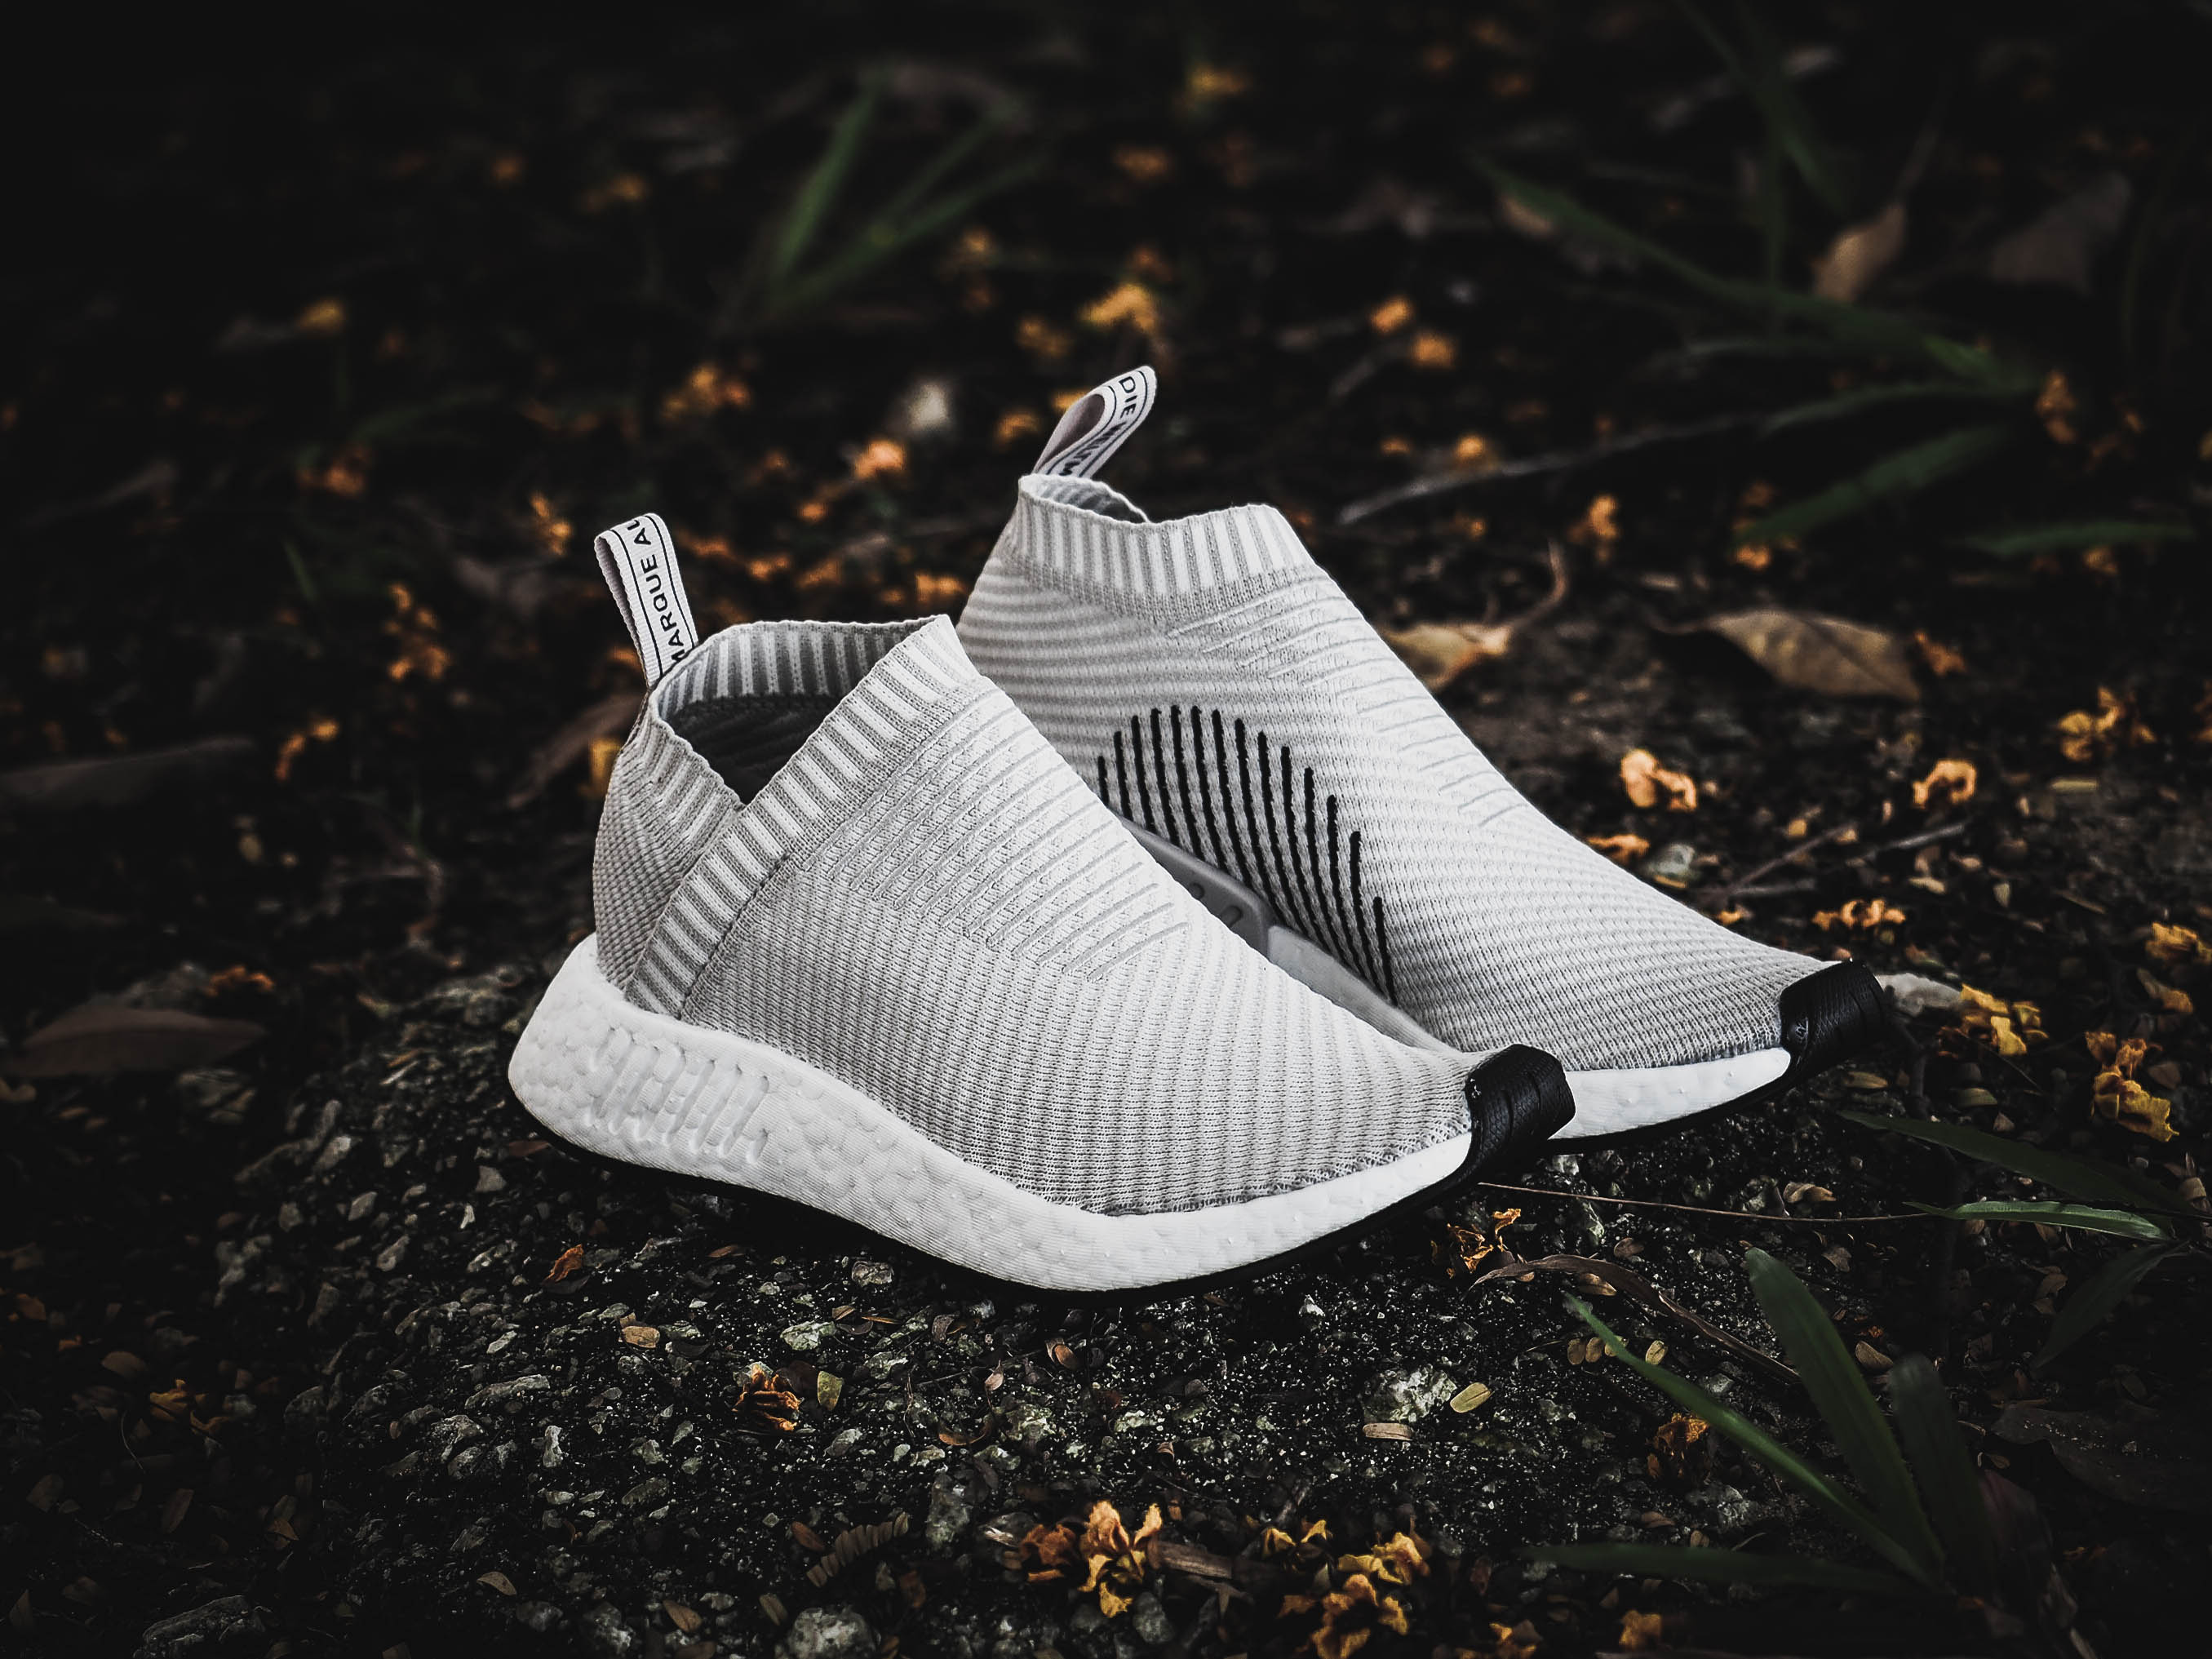 Adidas NMD XR1 Slickieslaces Explore Your World